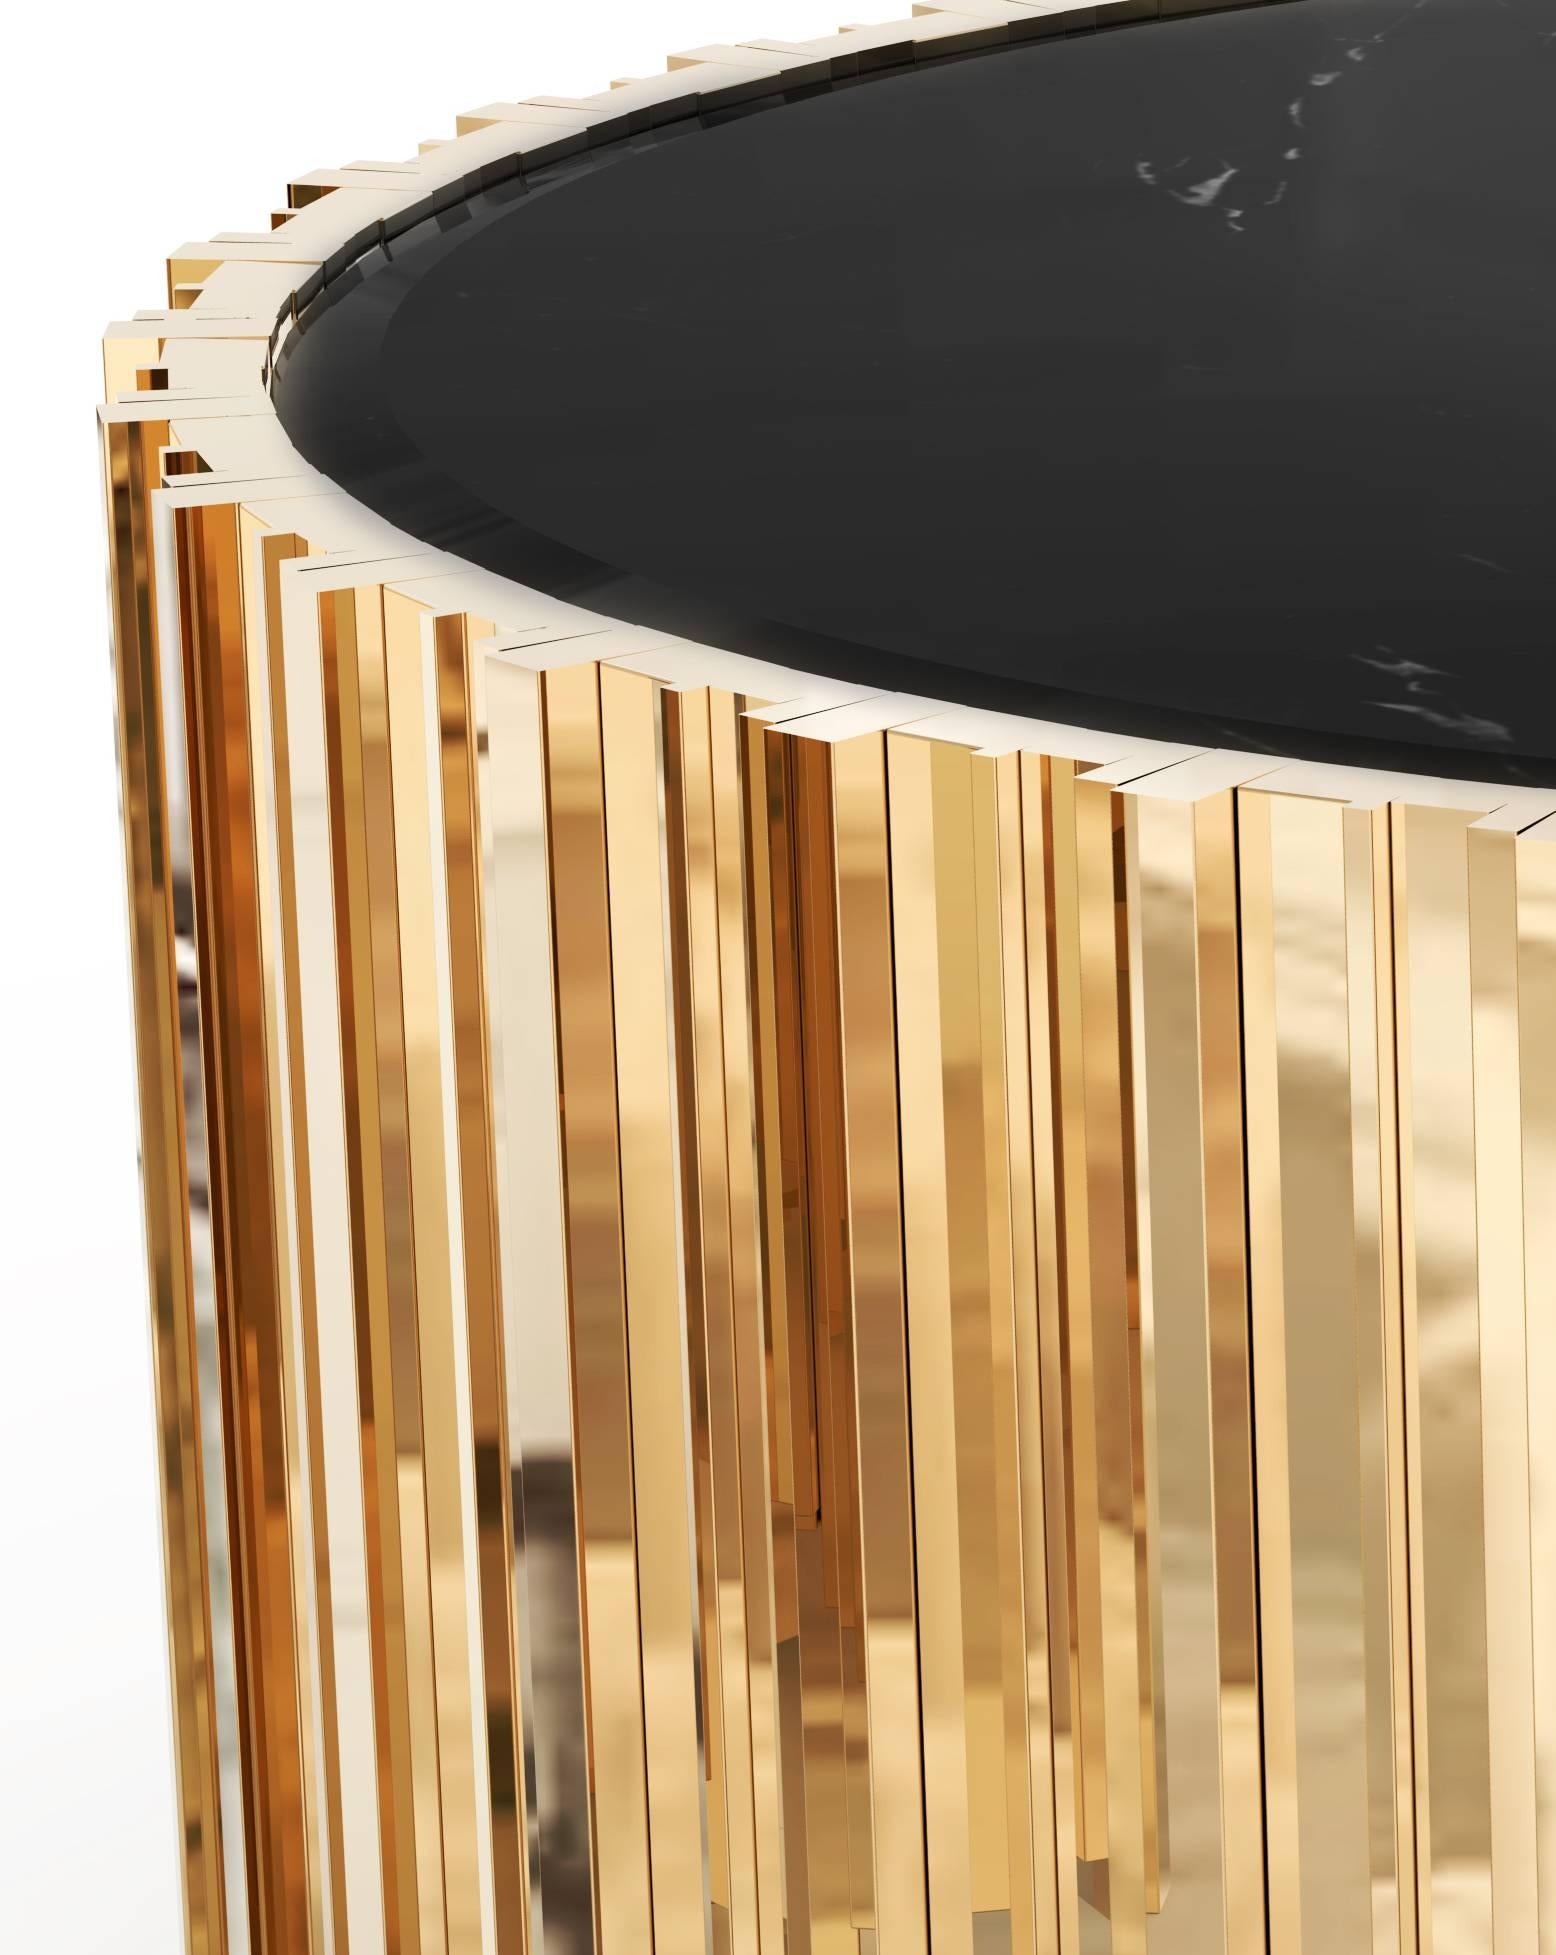 This center table has an extravagant shape of refinement and style. It is carefully made in brass and Nero marquina marble. This is a perfect combination between the classic and modern, design for every interior setting.

Materials:
Body: Brass